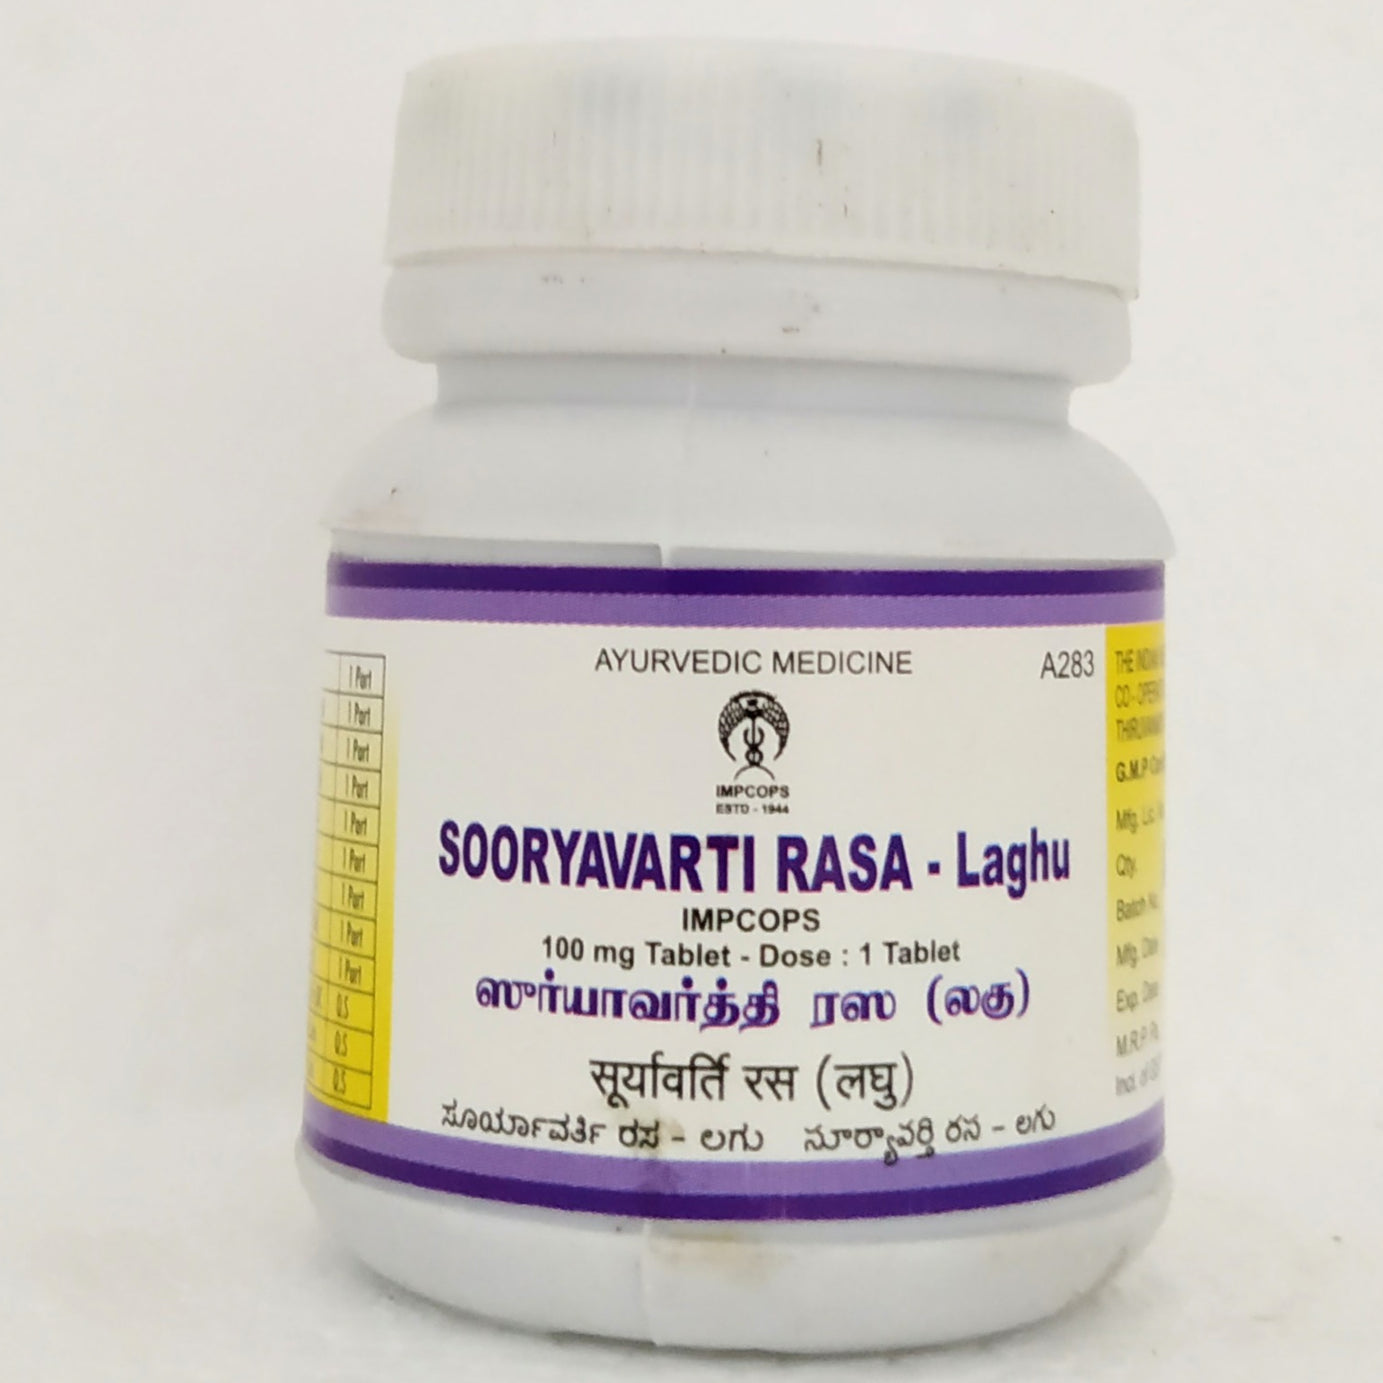 Shop Sooryavarti rasa laghu tablets 50gm at price 615.00 from Impcops Online - Ayush Care